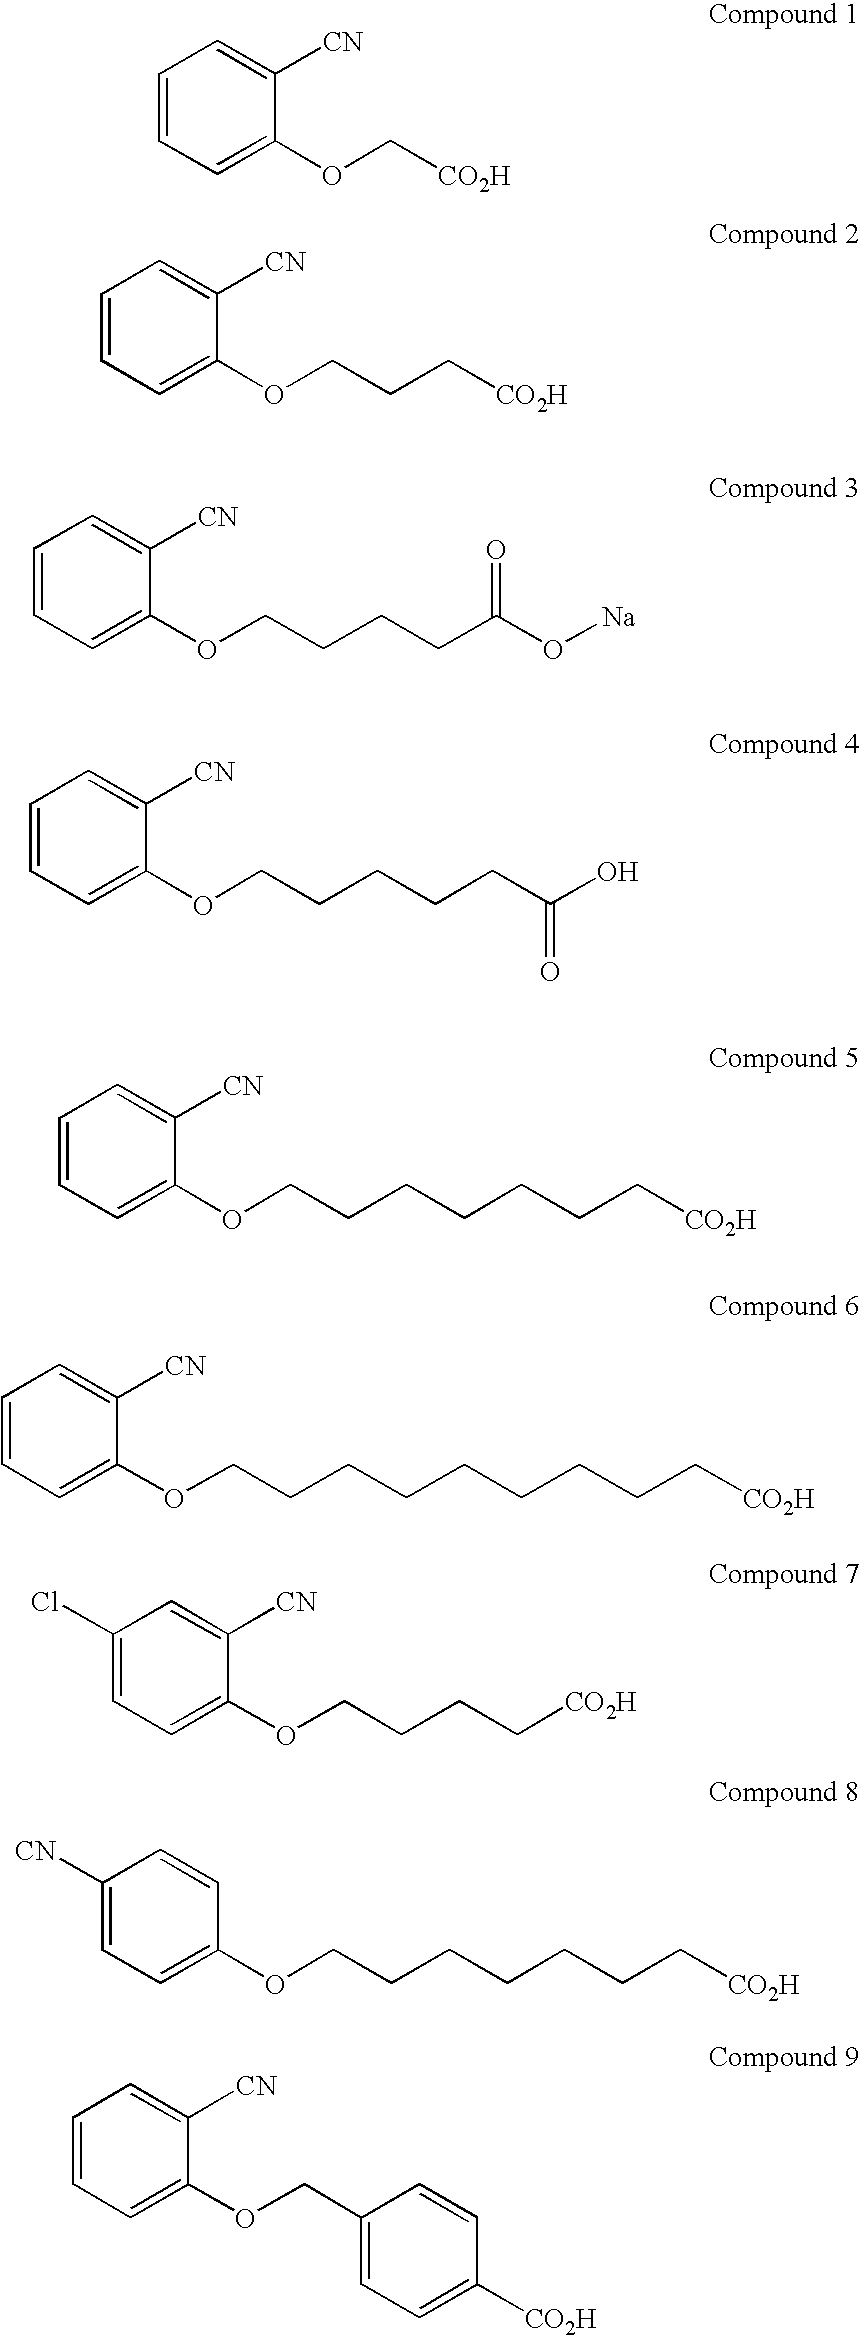 Cyanophenoxy carboxylic acid compounds and compositions for delivering active agents